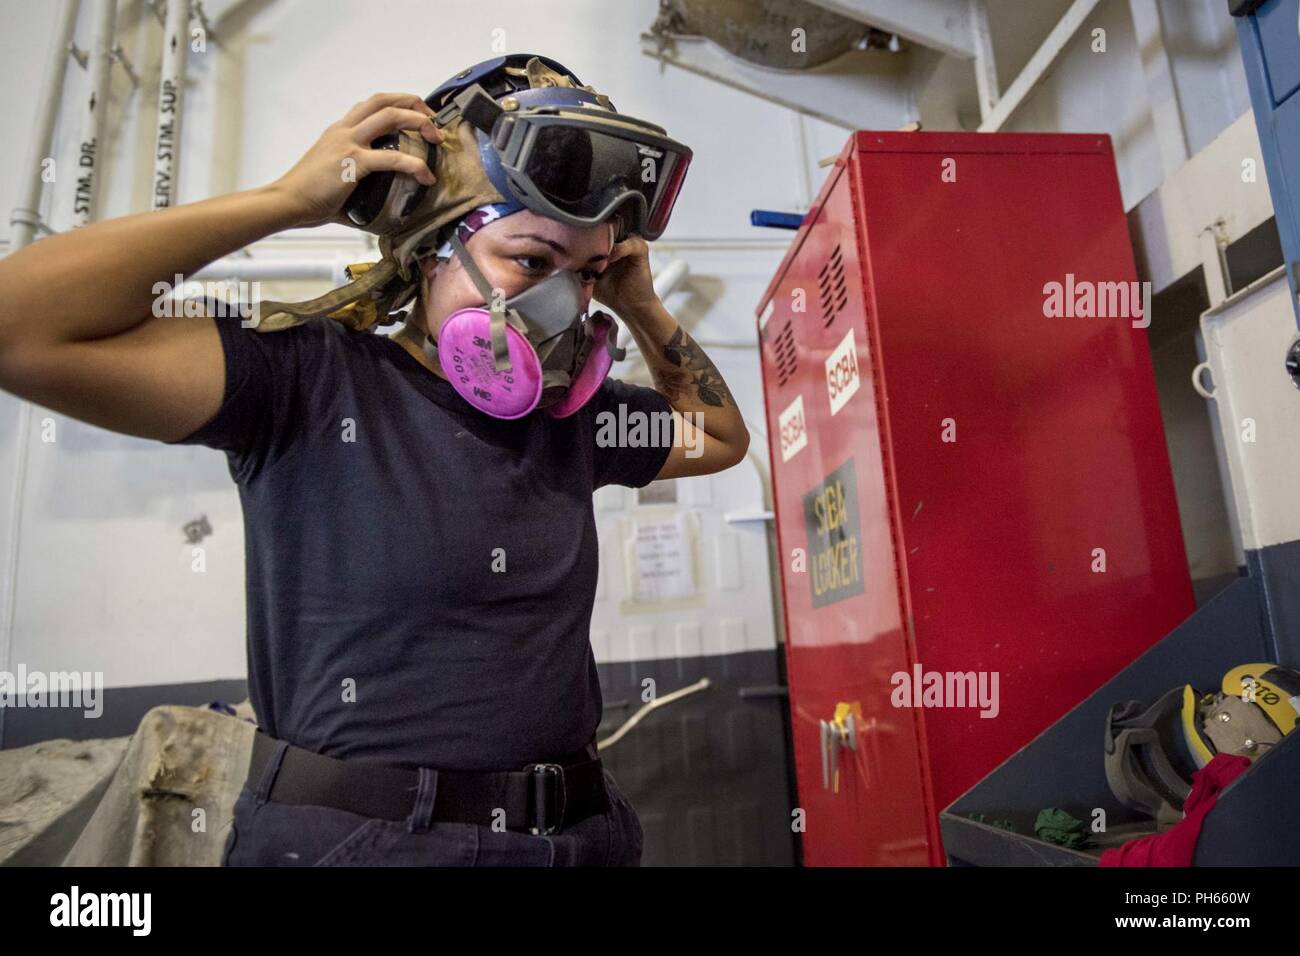 ATLANTIC OCEAN (June 26, 2018) Aviation Boatswain's Mate (Handling) Airman Shyla Souza, from Wahiawa, Hawaii, adjusts a cranial to be used for hearing and head protection before painting in the hangar bay aboard the aircraft carrier USS George H.W. Bush (CVN 77). The ship is underway conducting routine training exercises to maintain carrier readiness. Stock Photo